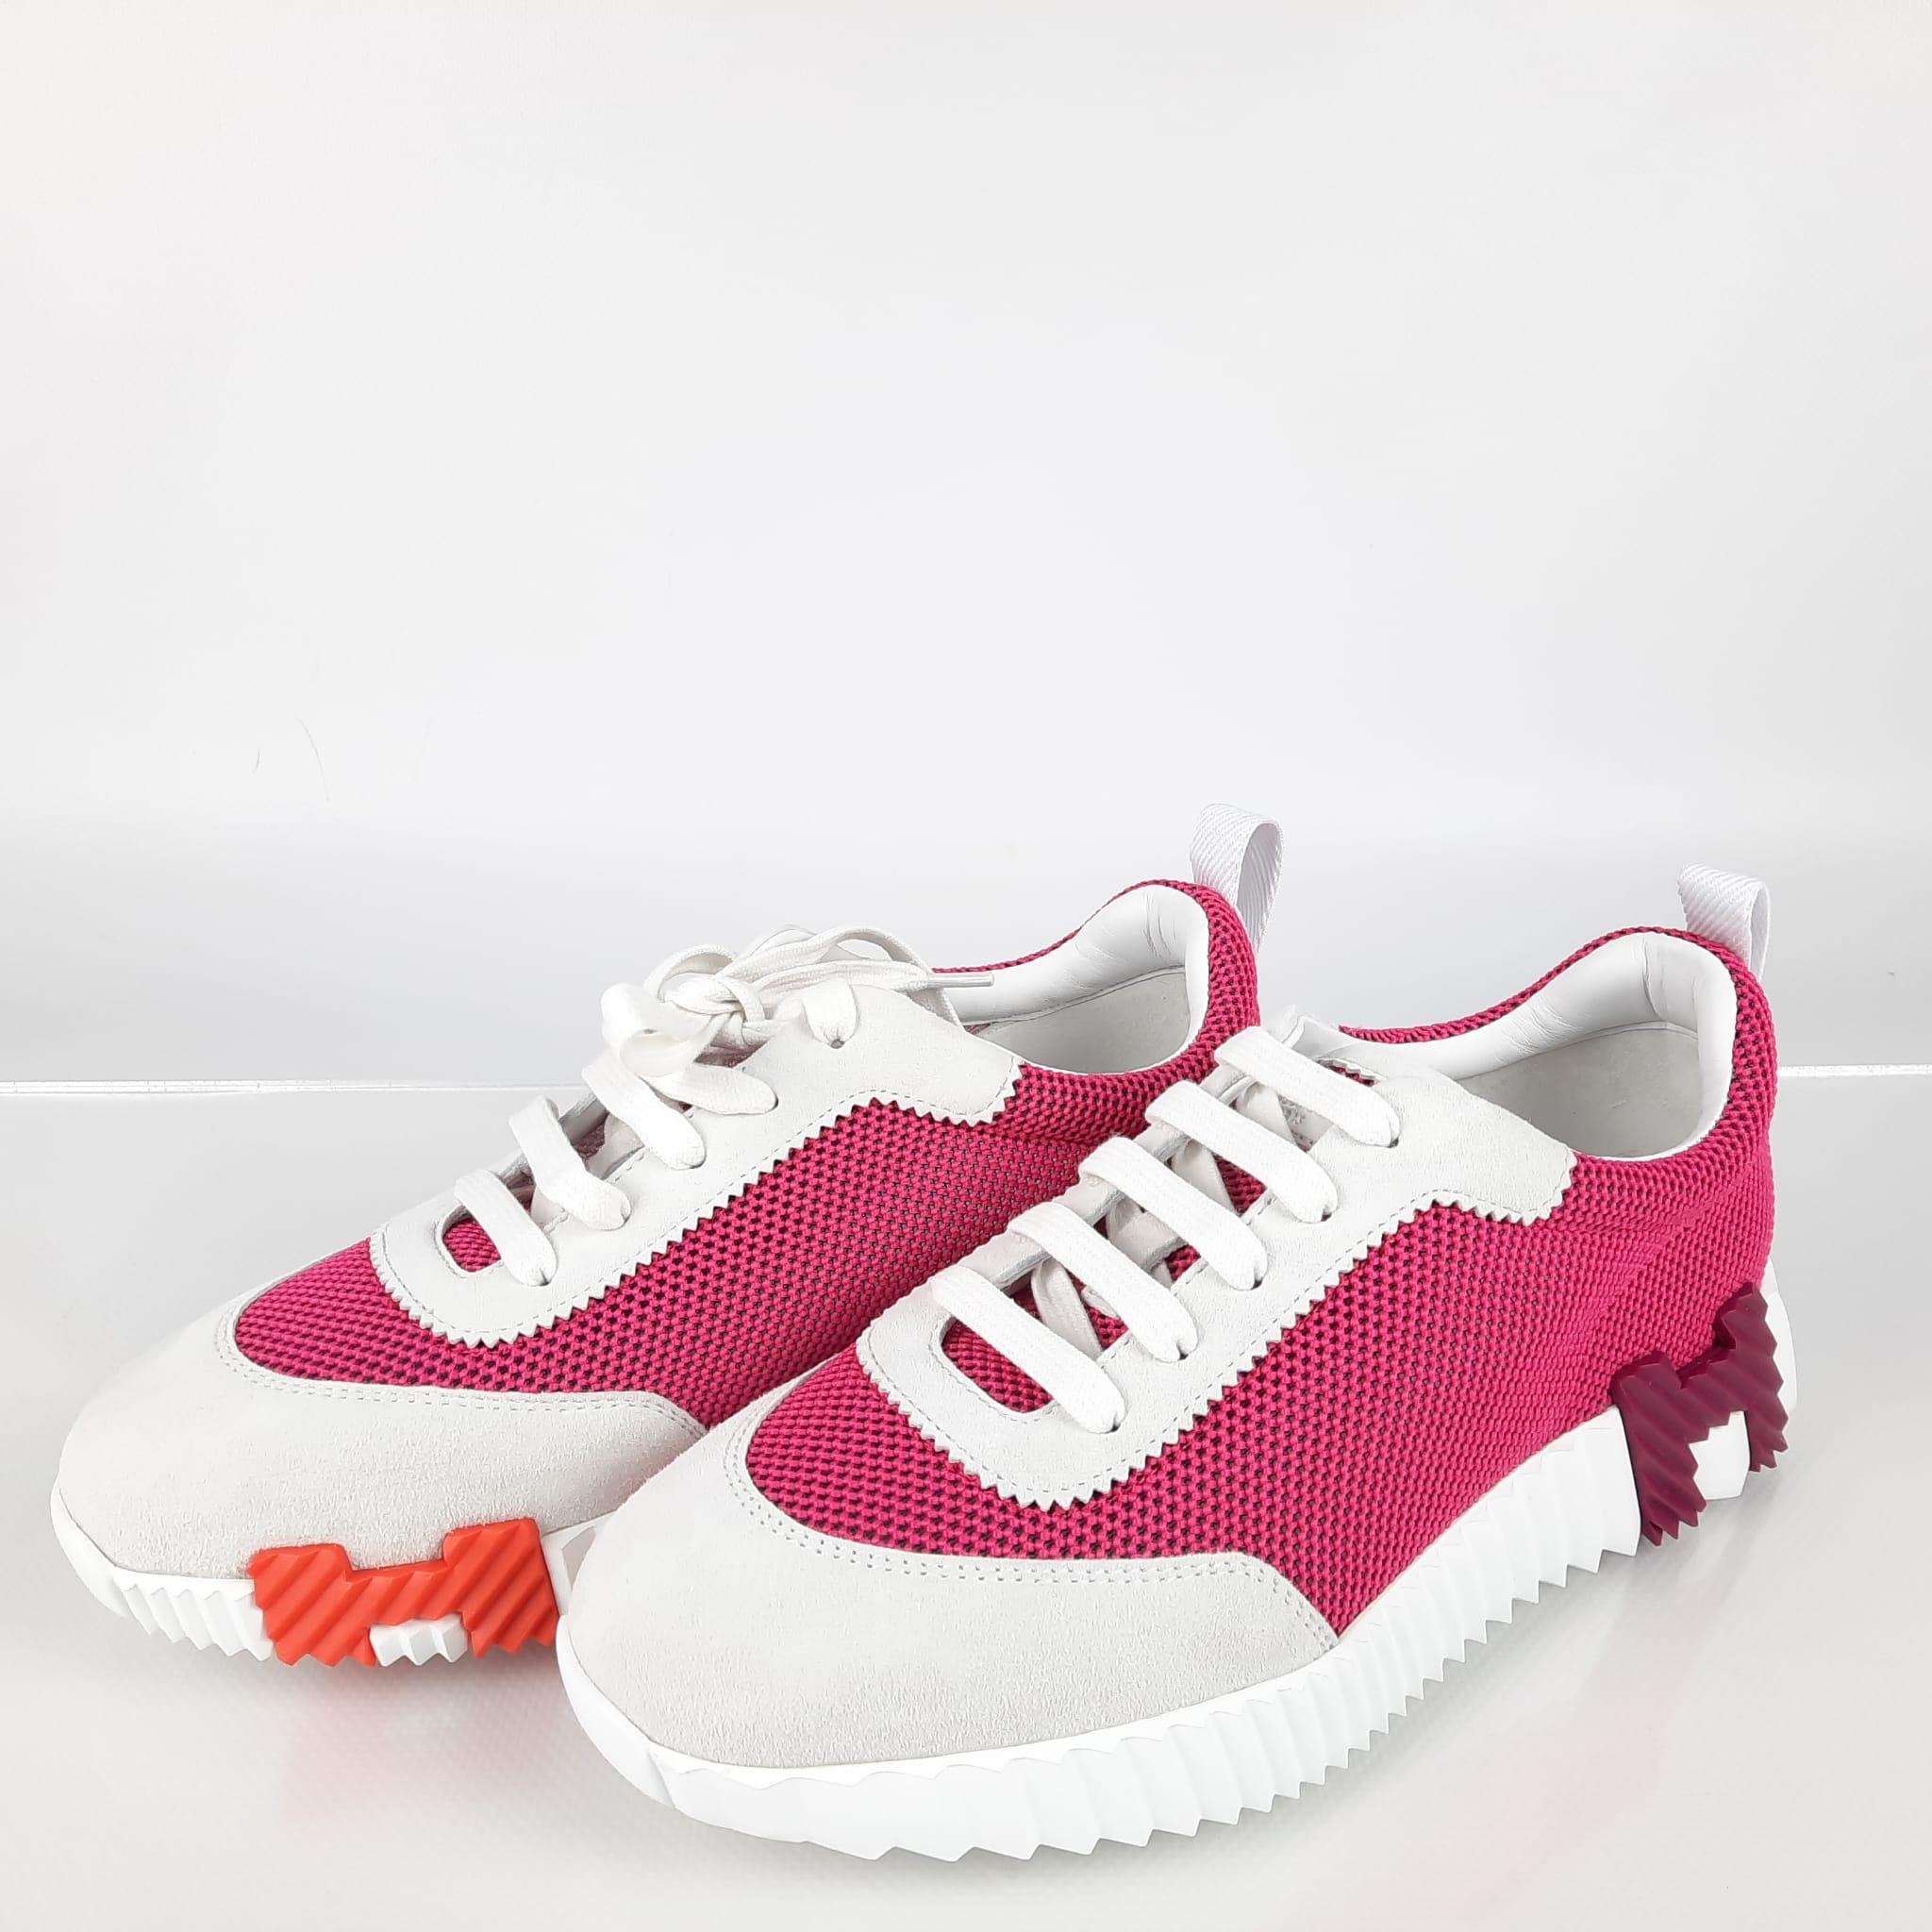 Hermes Bouncing Sneakers Color Vinicunca Pink / White Size 39  3